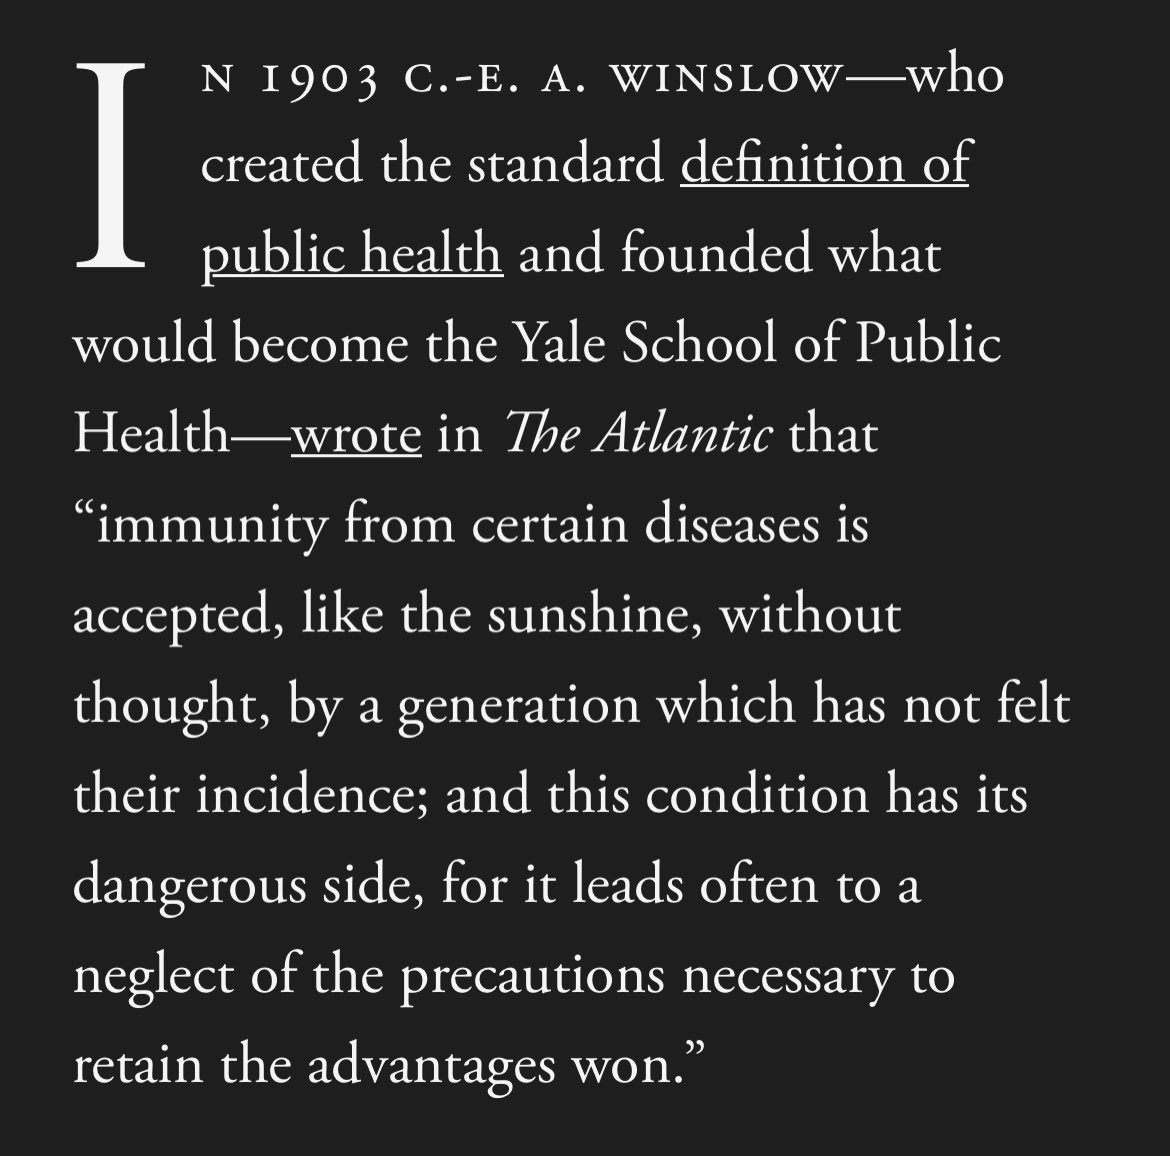 I want to dedicate this to my friend @meganranney, the incoming Dean at @YaleSPH. Like C.-E.A. Winslow who preceded her in that role (a century ago!), I can think of no one more committed to advancing public health and continuing that incredible legacy. 🙏